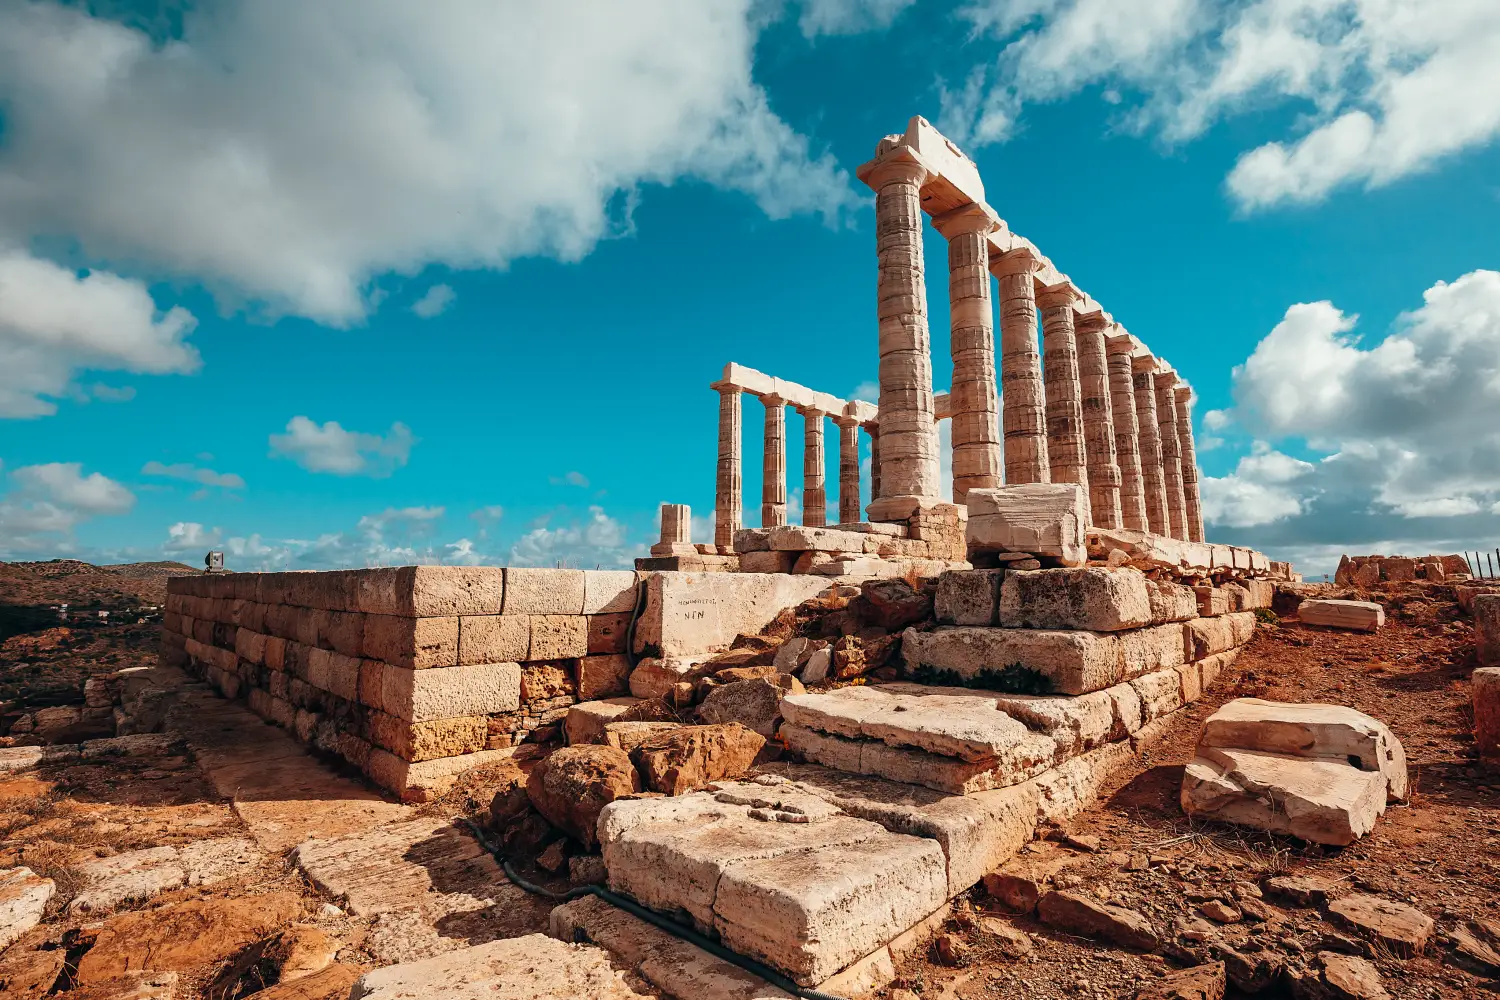 Ferry to Lavrio - The Ancient Greek temple of Poseidon at Cape Sounion, Athens, Greece.